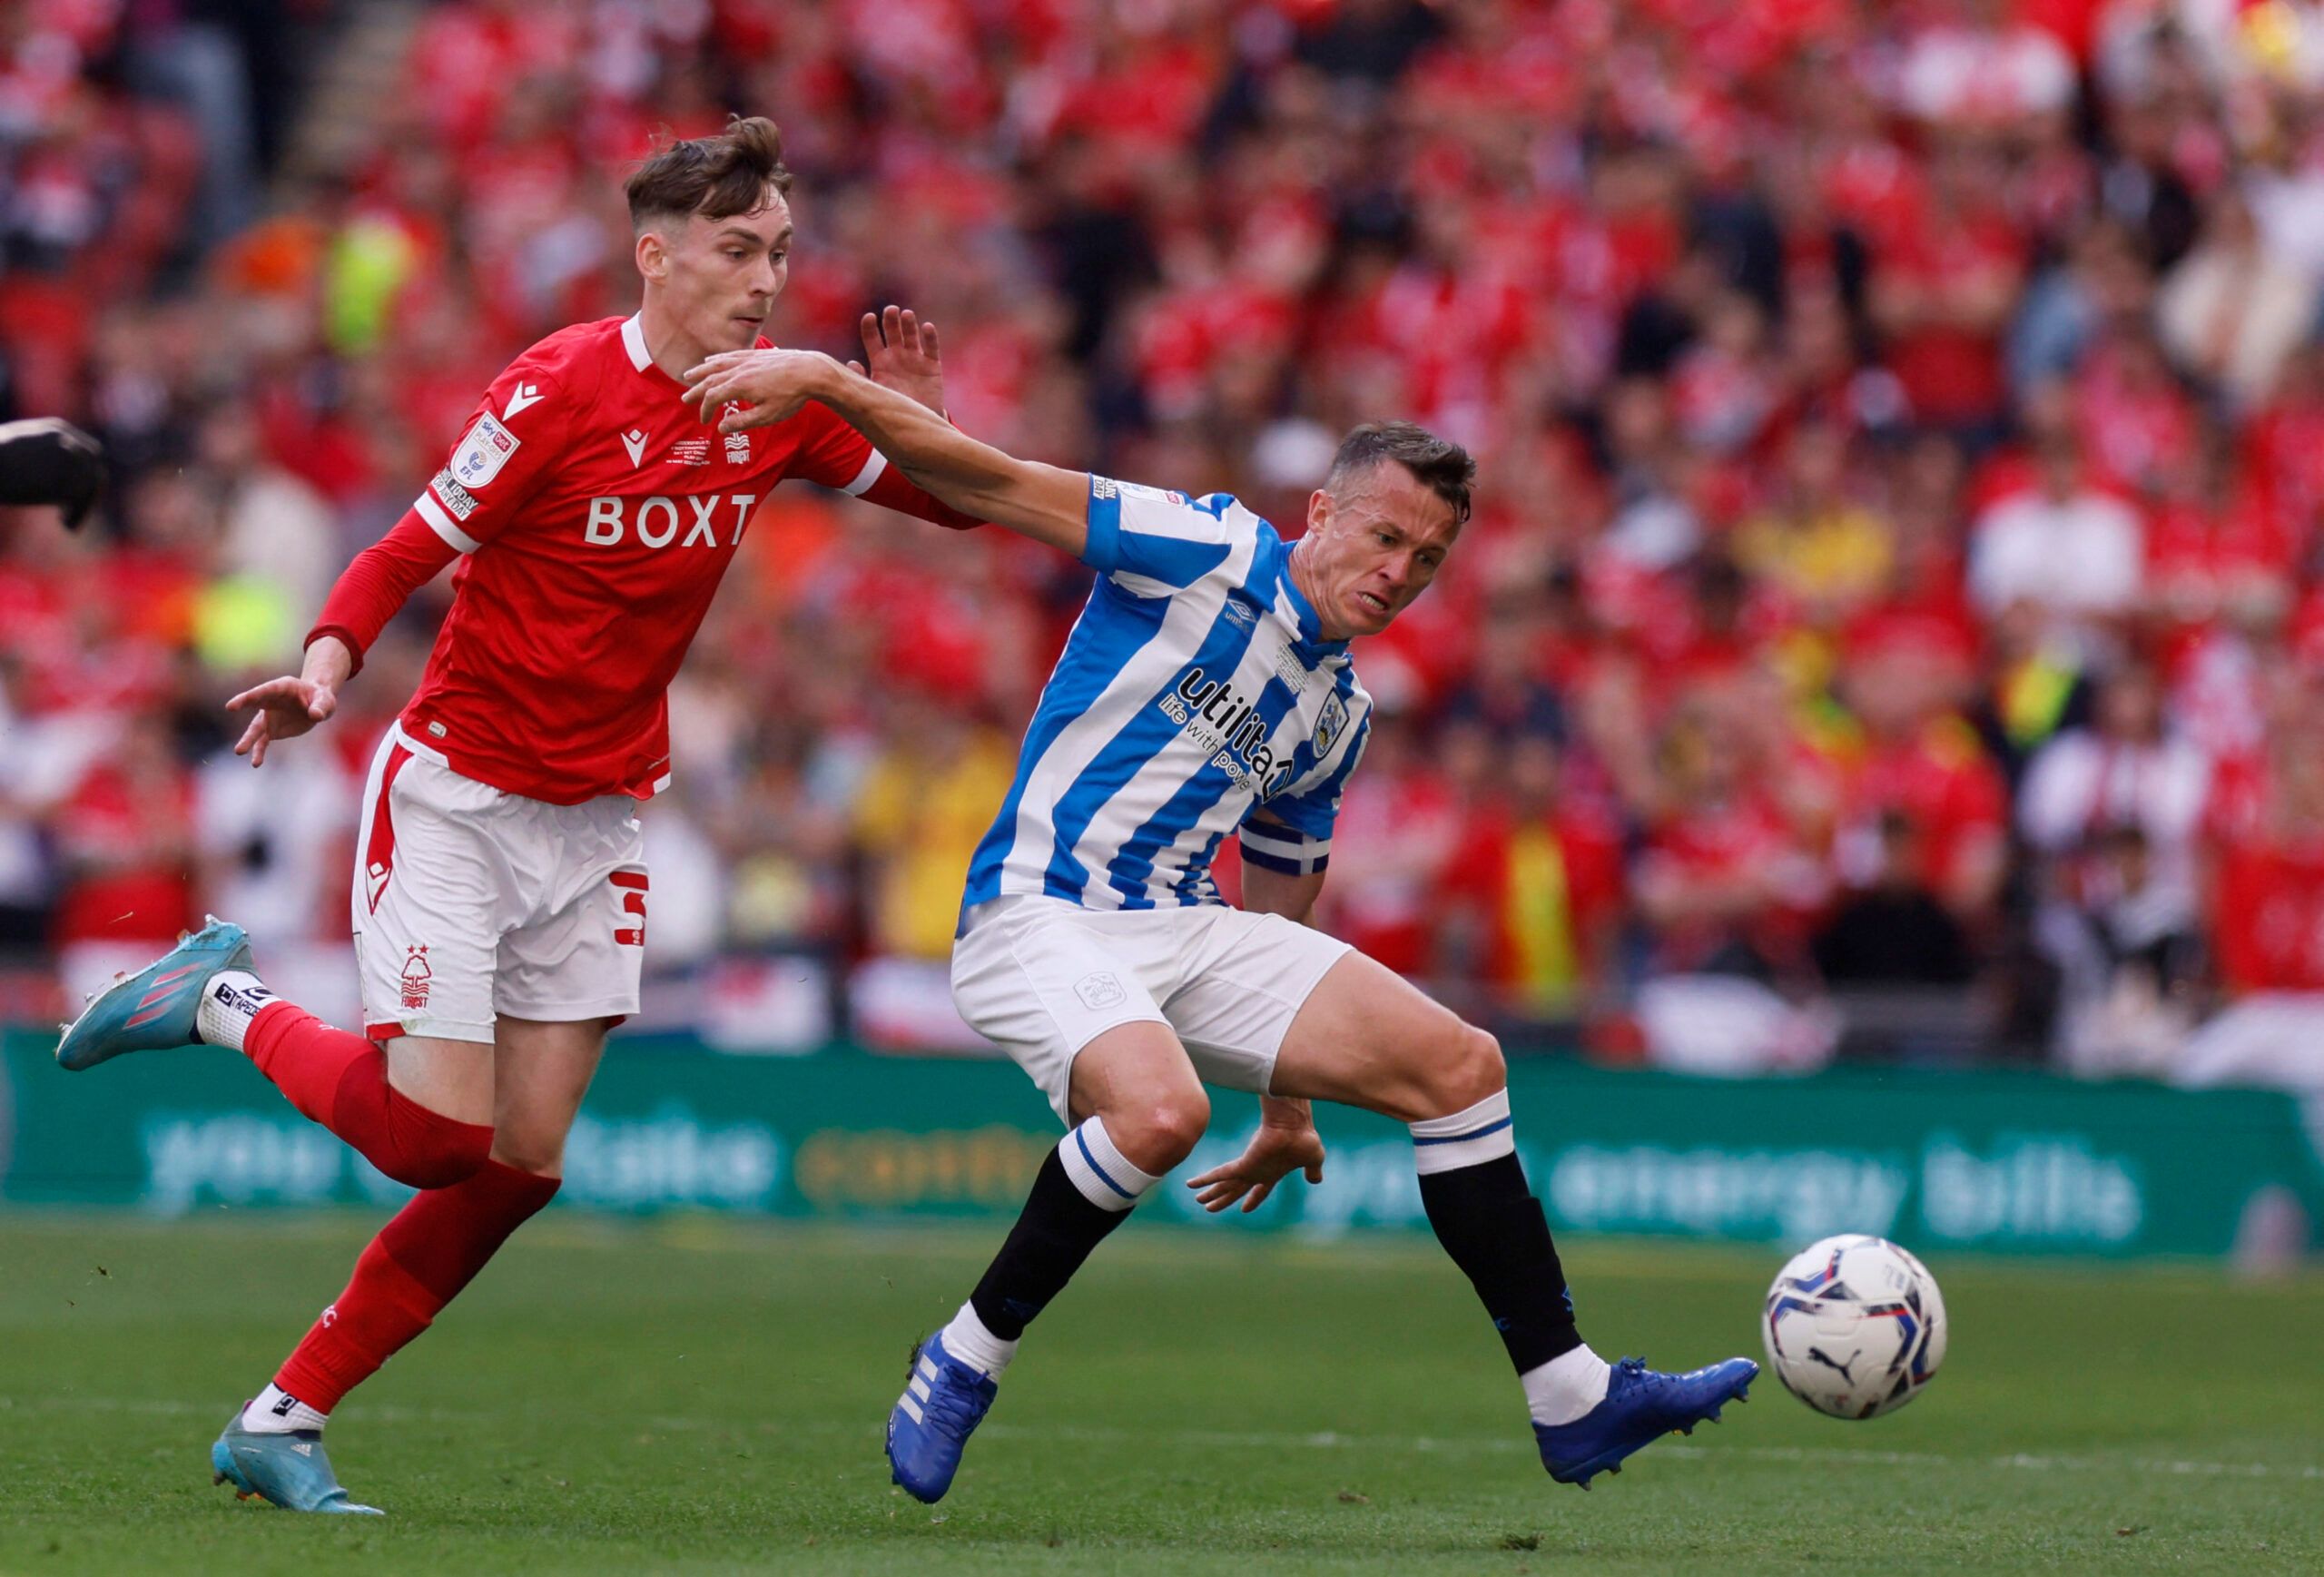 Soccer Football - Championship Play-Off Final - Huddersfield Town v Nottingham Forest - Wembley Stadium, London, Britain - May 29, 2022 Nottingham Forest's James Garner in action with Huddersfield Town's Jonathan Hogg Action Images via Reuters/Andrew Couldridge